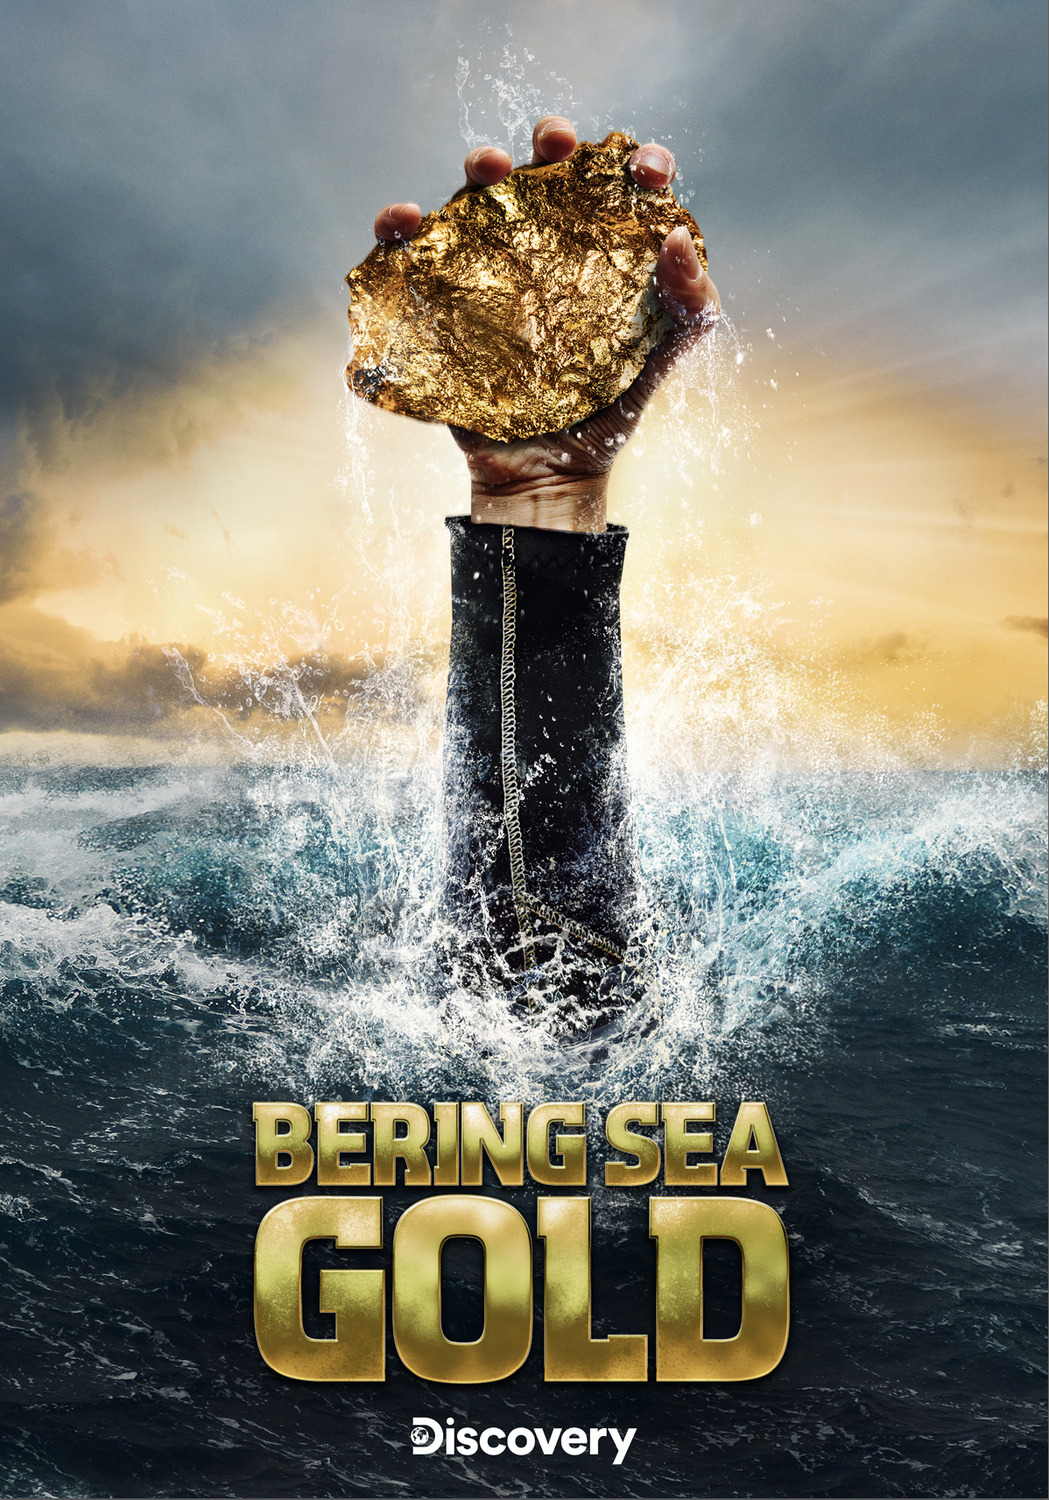 Extra Large TV Poster Image for Bering Sea Gold 